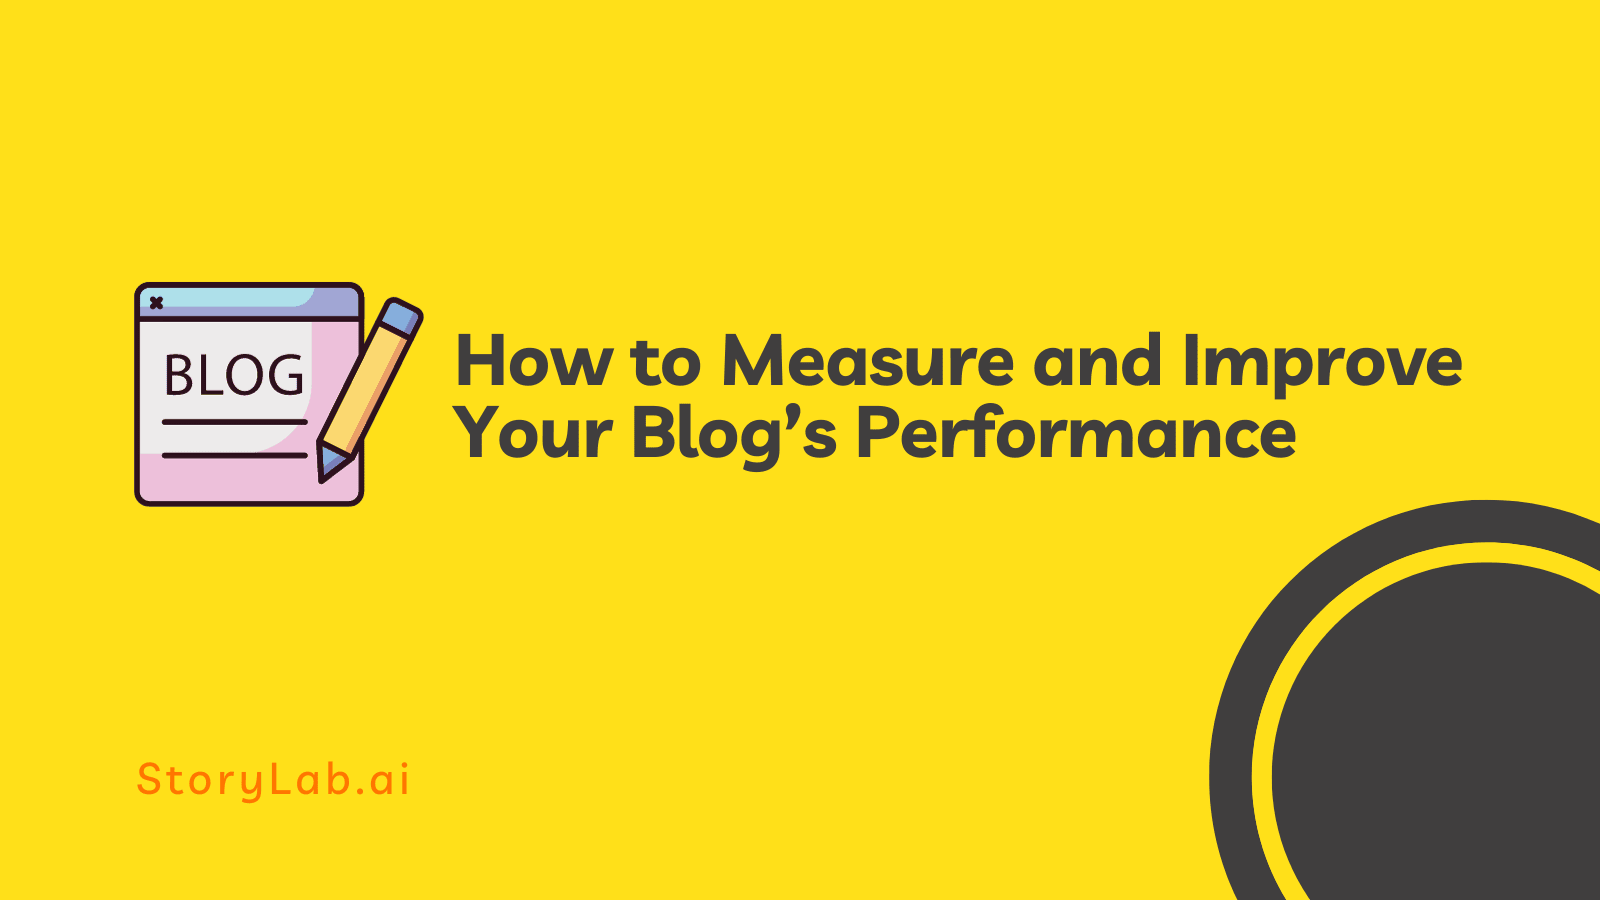 How to Measure and Improve Your Blog Performance